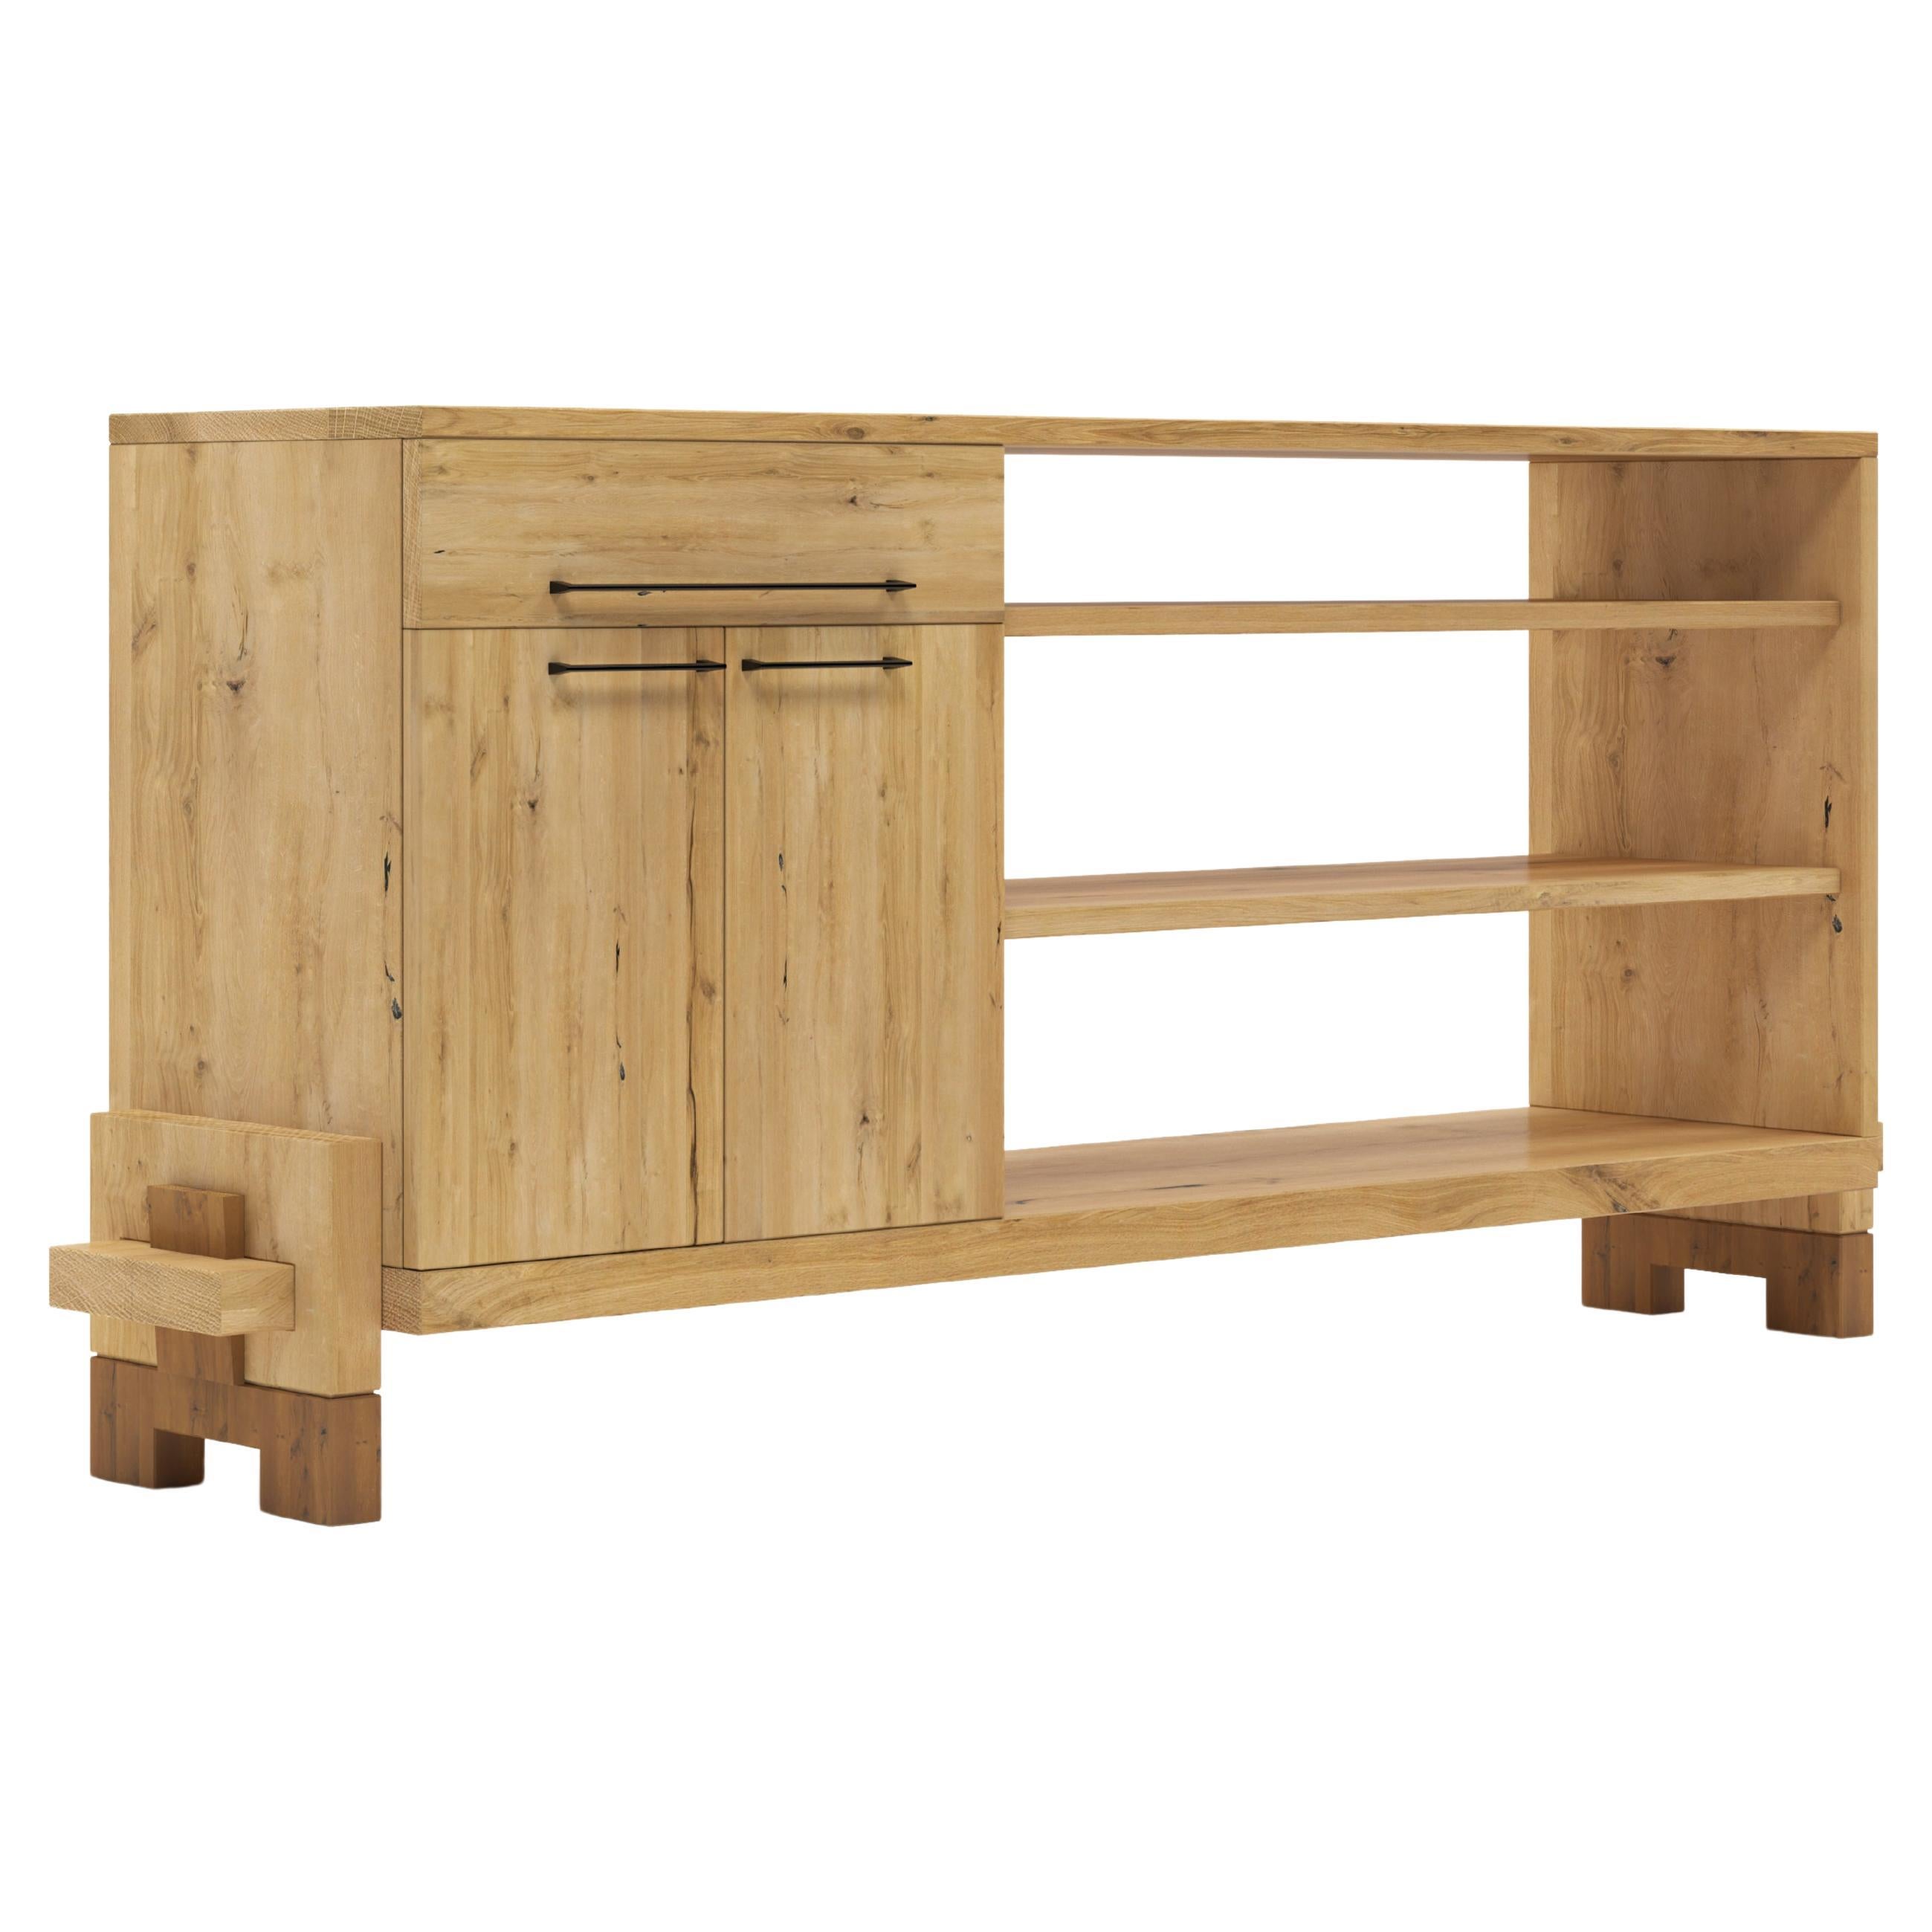 Pana Sideboard S For Sale